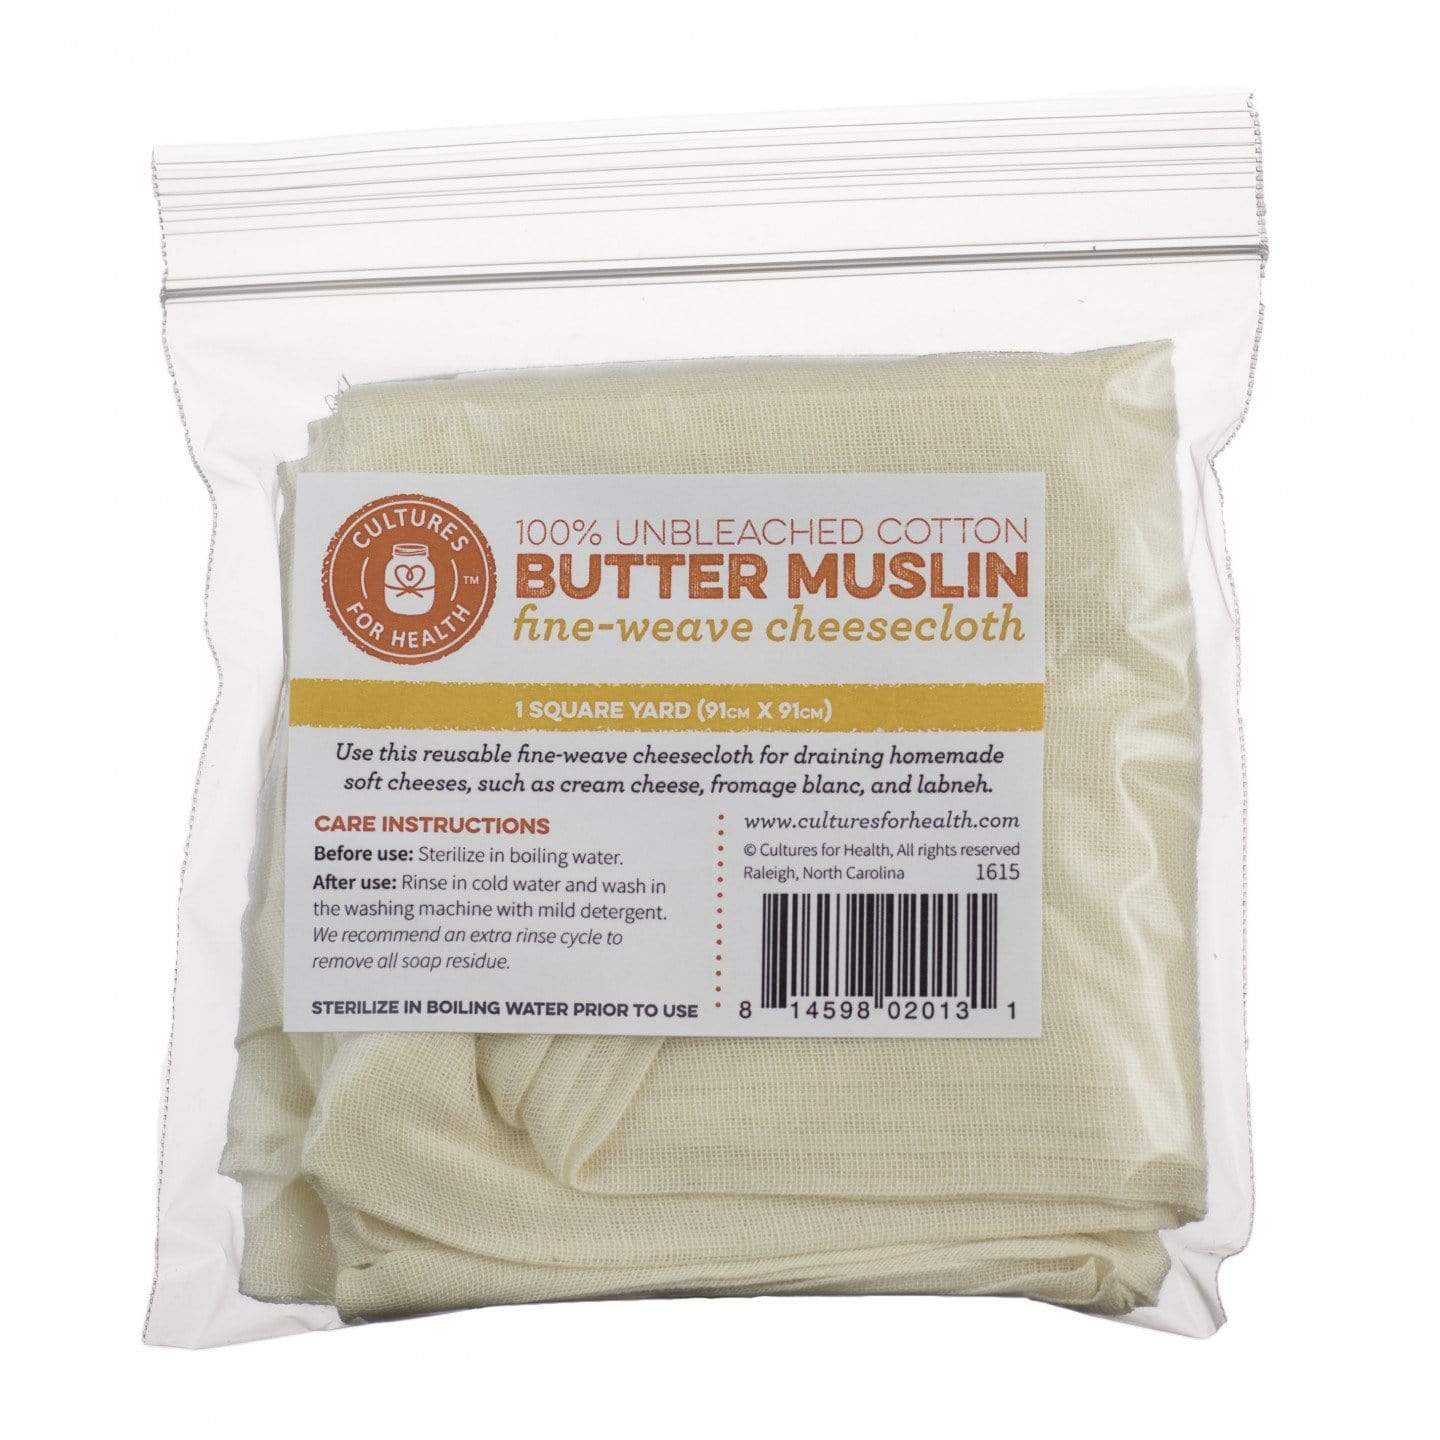 Cultures for Health Butter Muslin, Fine-Weave Cheesecloth - Azure Standard